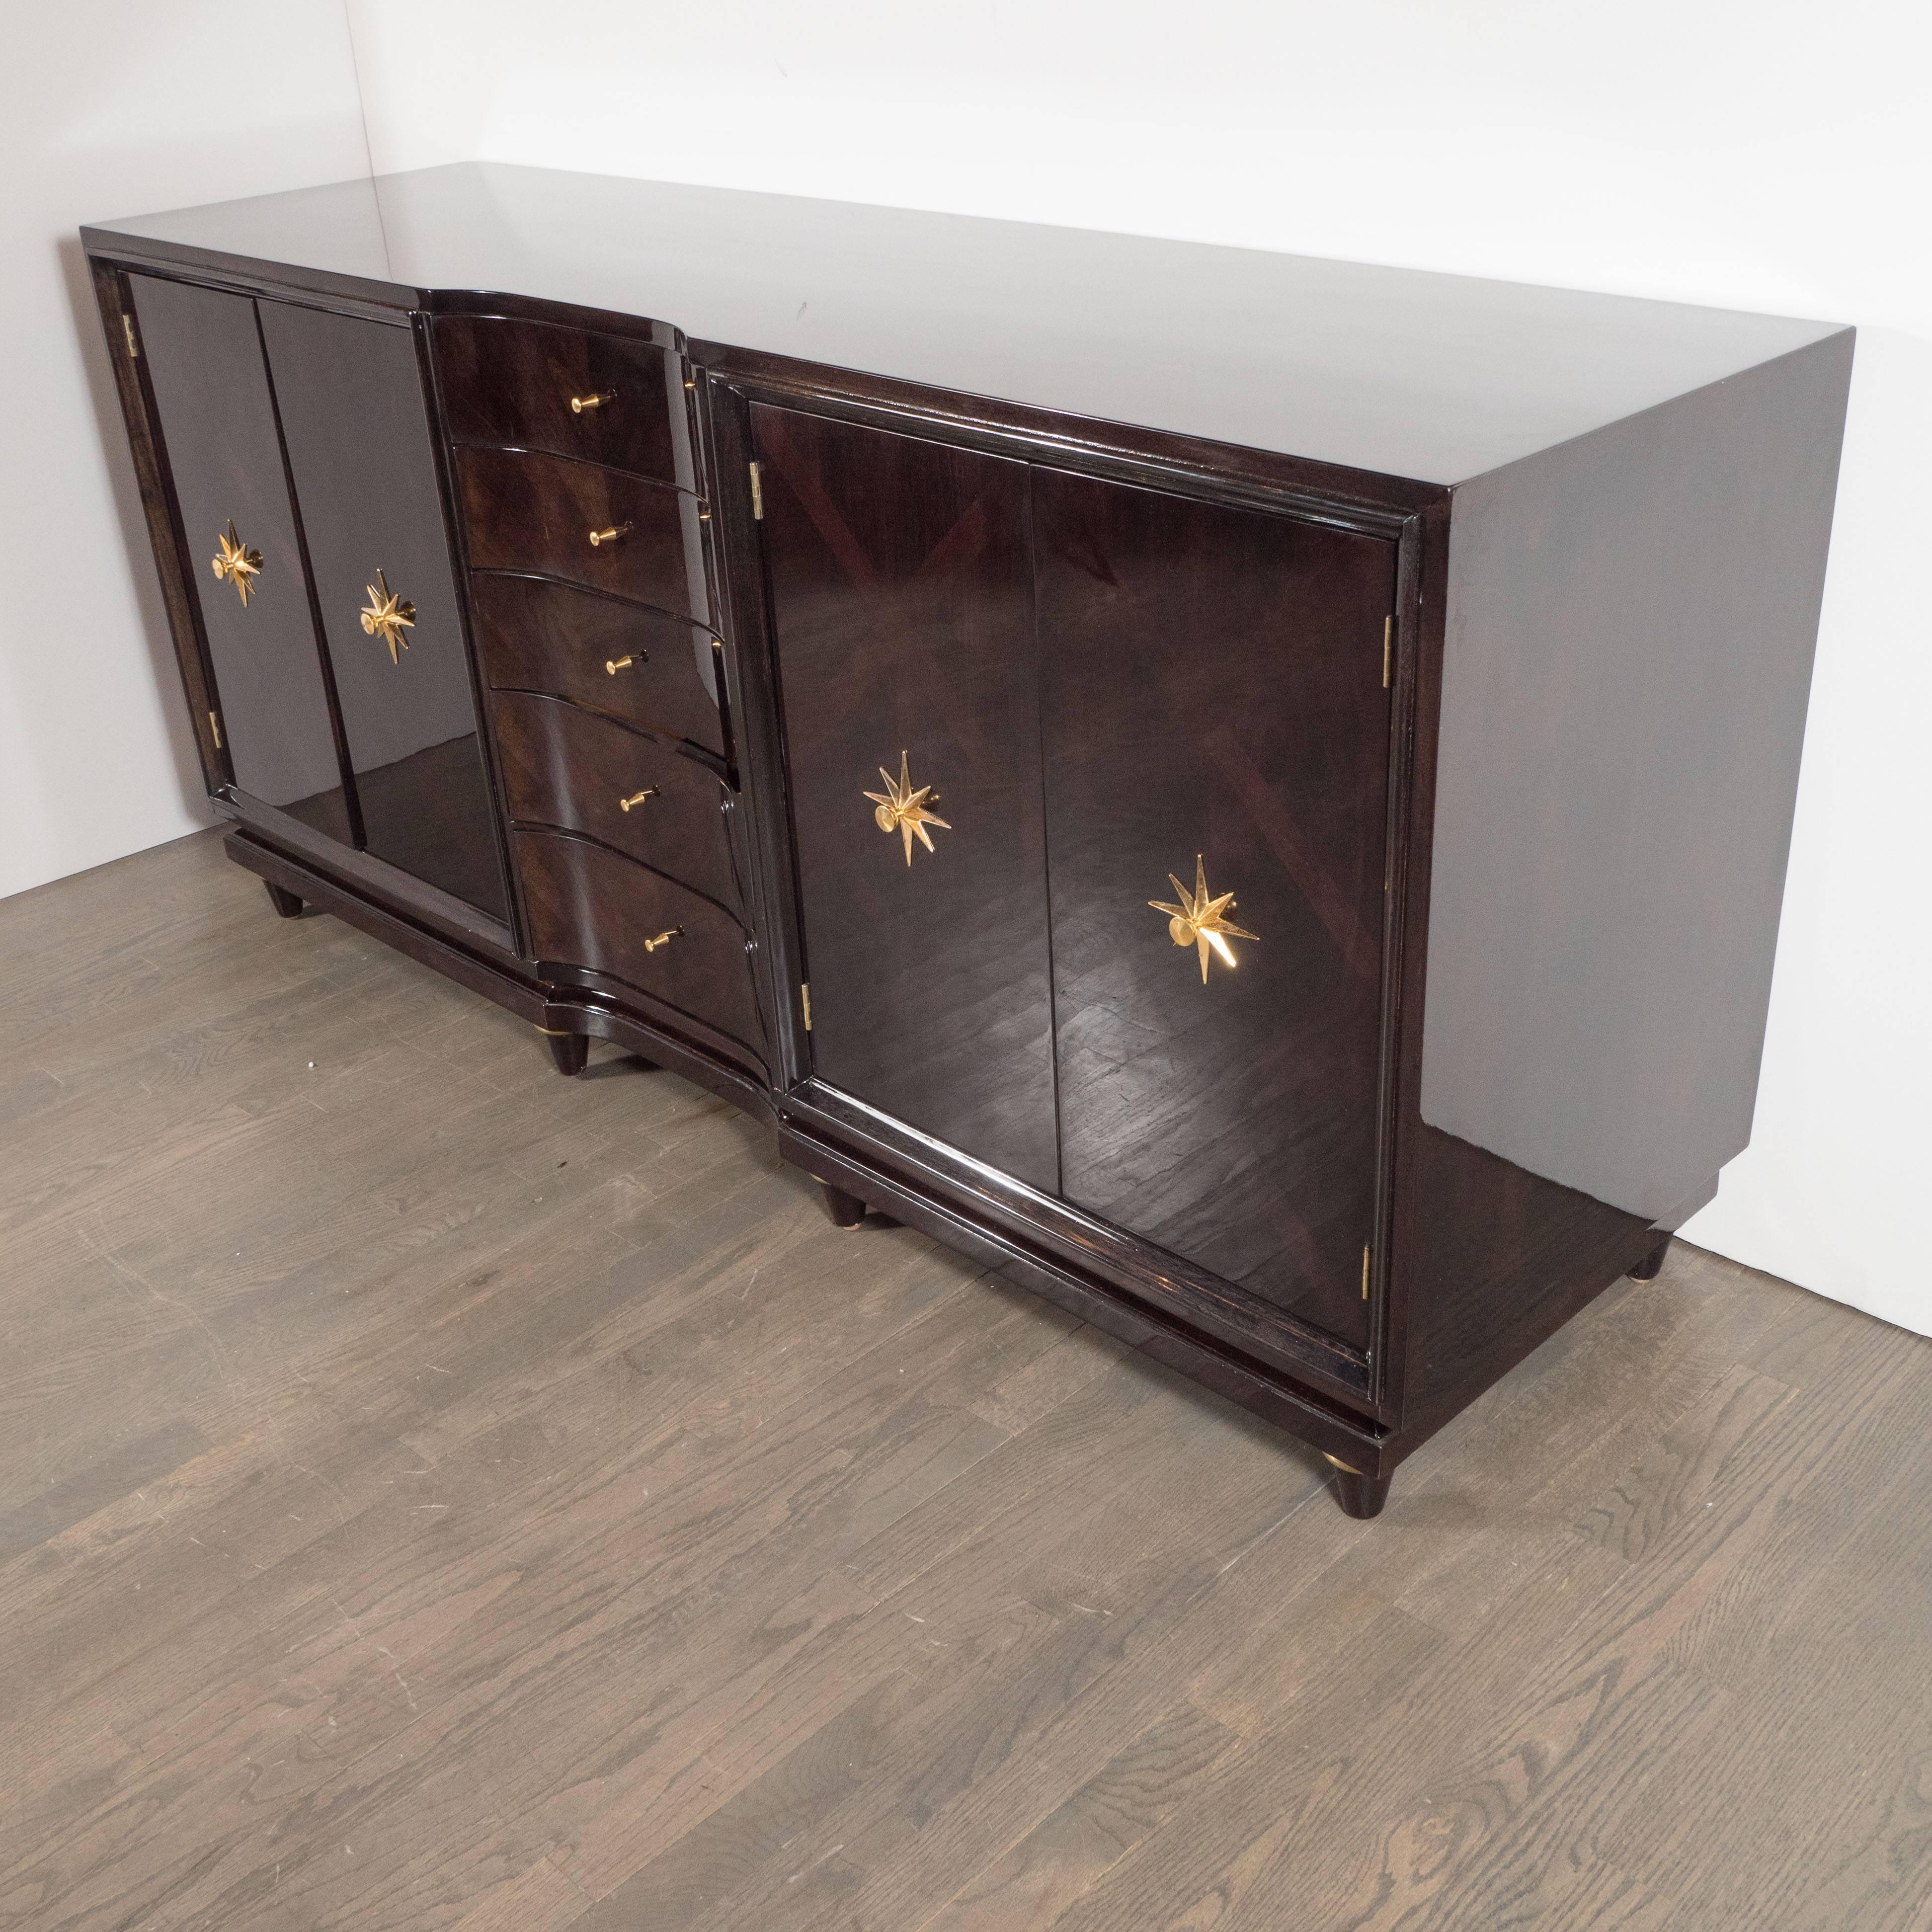 This fine ebonized walnut sideboard was realized in the United States by the esteemed J.B. Van Sciver Company, circa 1950. There are five center drawers (measuring 15.25" W X 13.75" D each) with hourglass shaped brass pulls culminating in